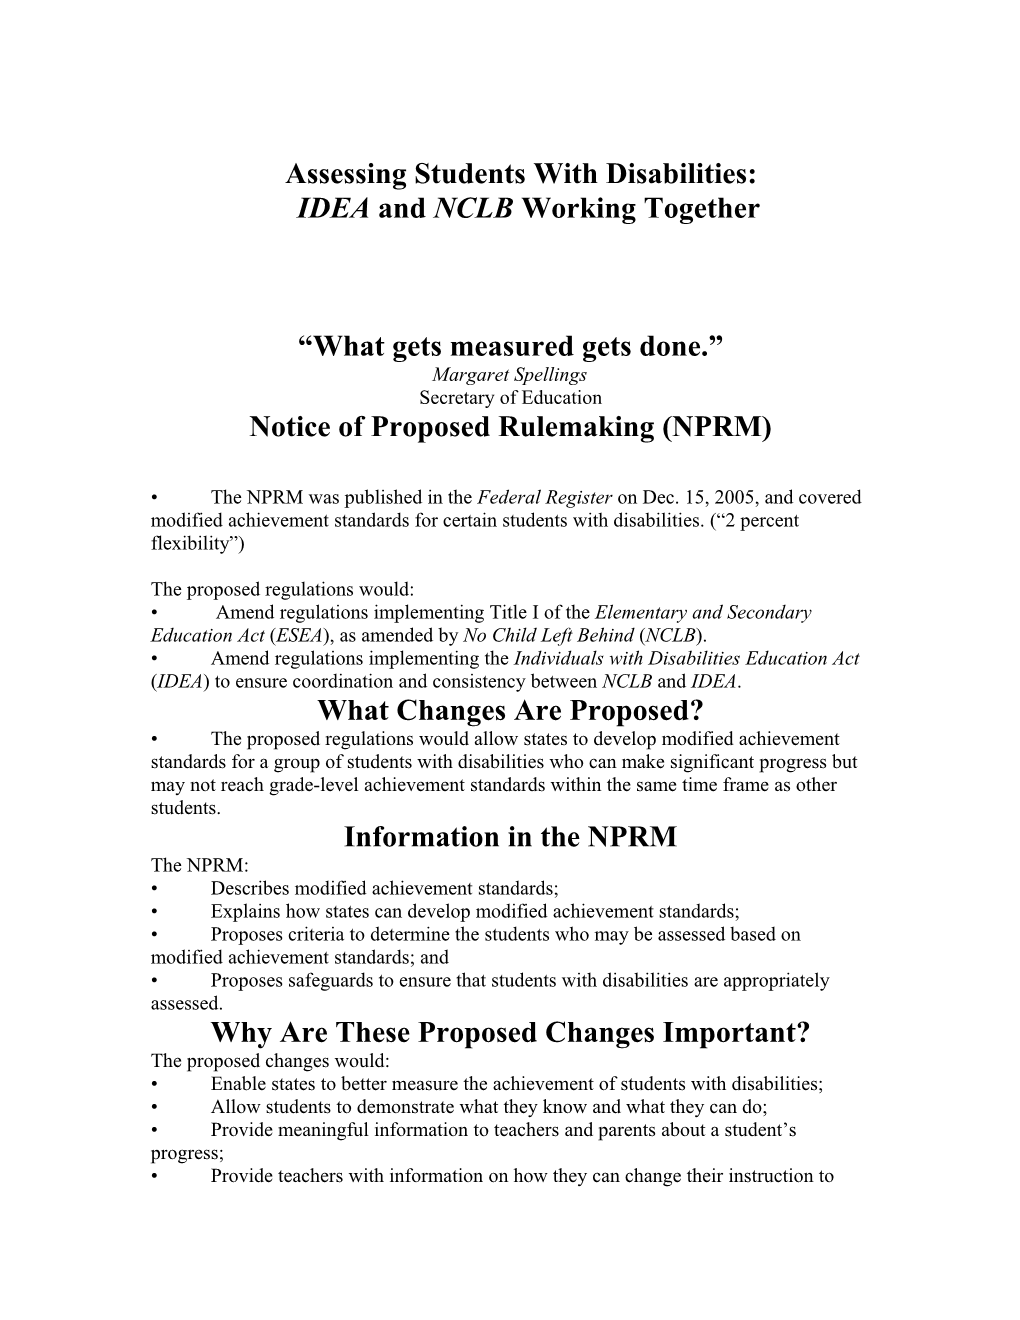 Assessing Students with Disabilities: IDEA and NCLB Working Together January 2006 (Msword)